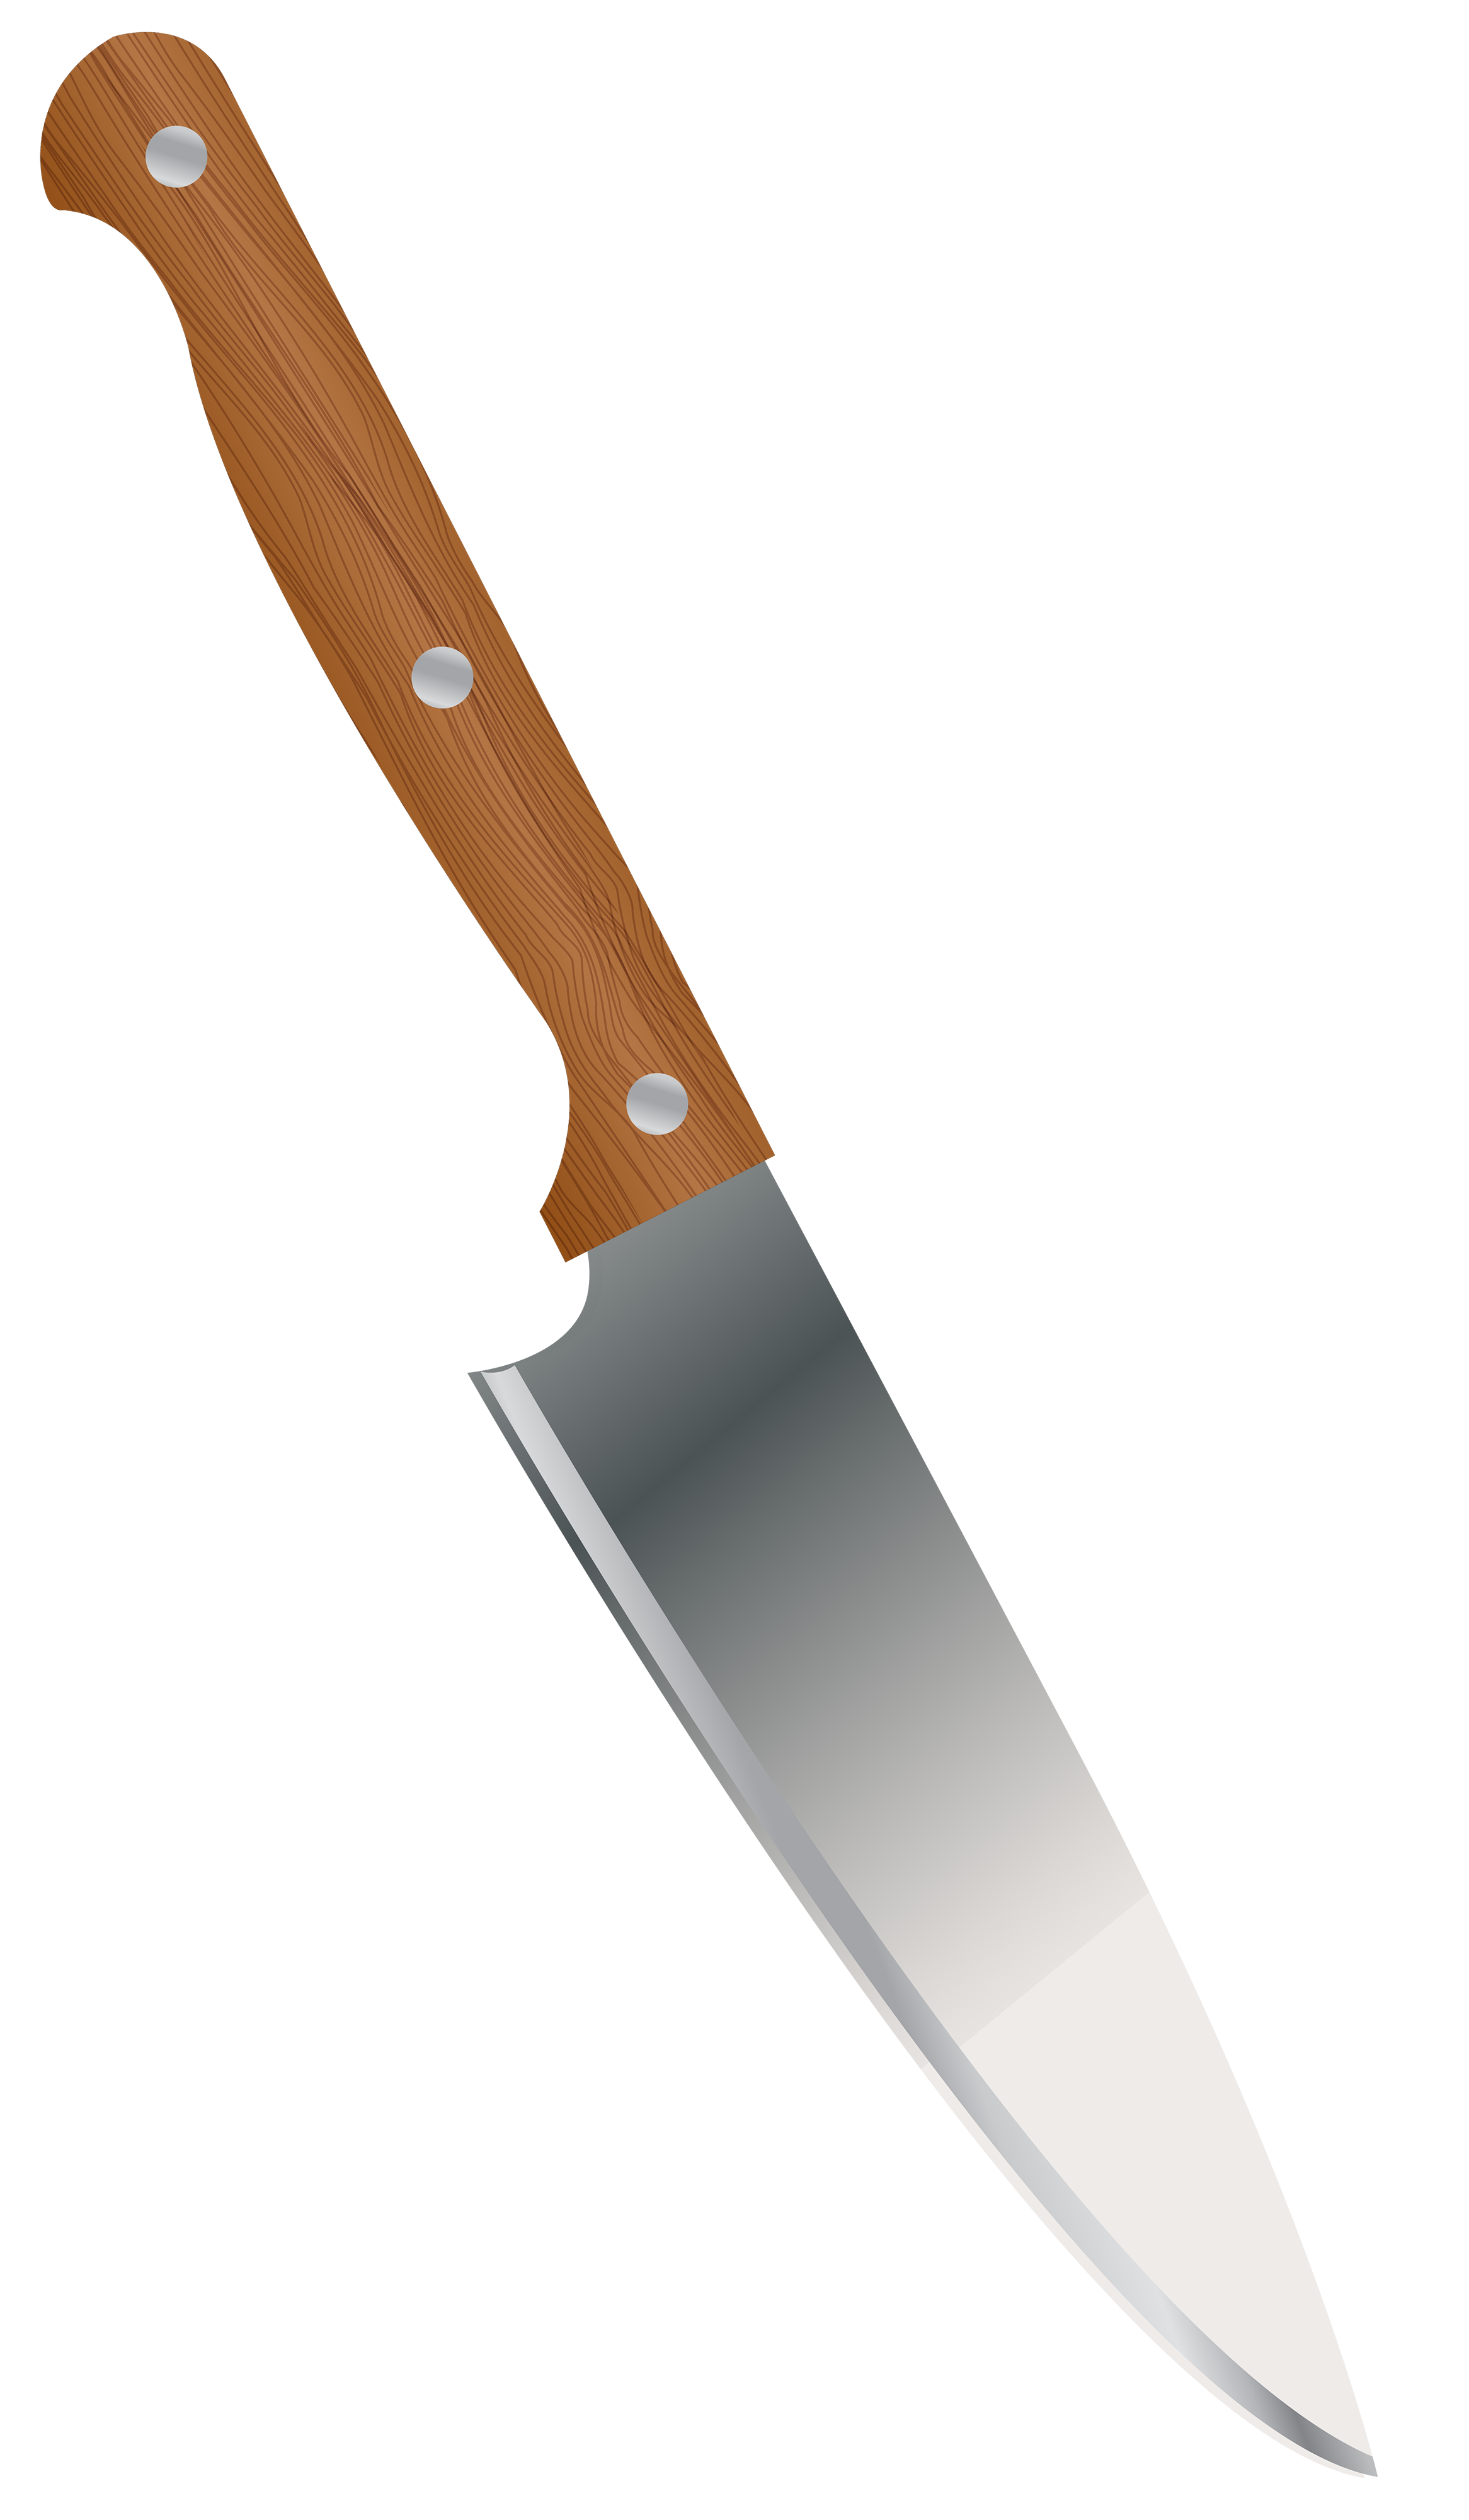 clipart pictures of knives - photo #43